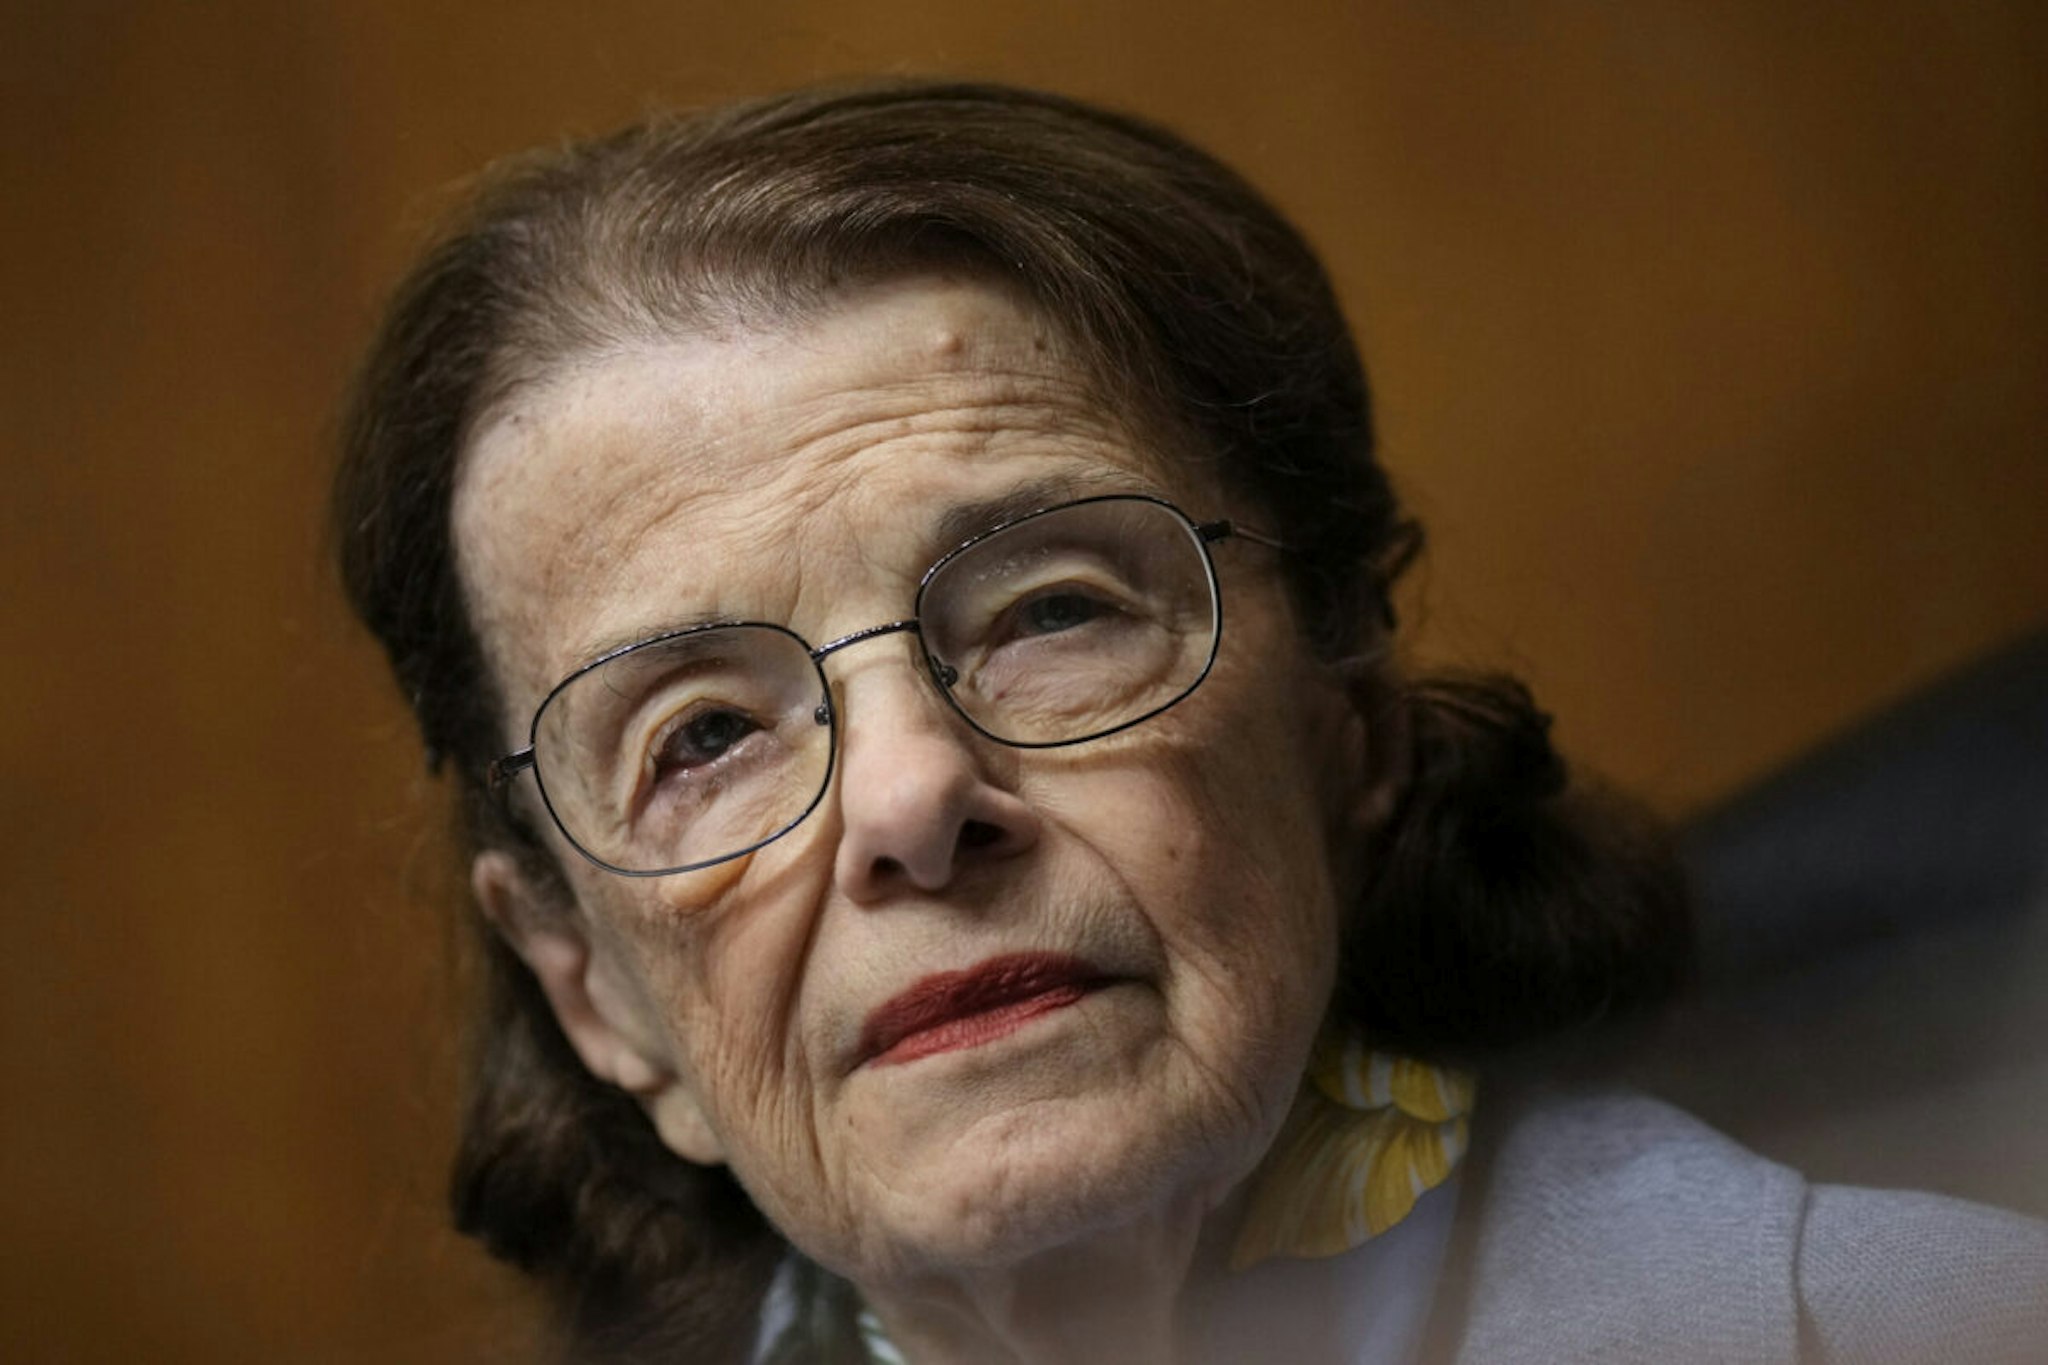 WASHINGTON, DC - SEPTEMBER 6: Sen. Dianne Feinstein (D-CA) attends a Senate Judiciary Committee hearing on judicial nominations on Capitol Hill September 6, 2023 in Washington, DC. During the hearing the committee considered five judges for federal vacancies.